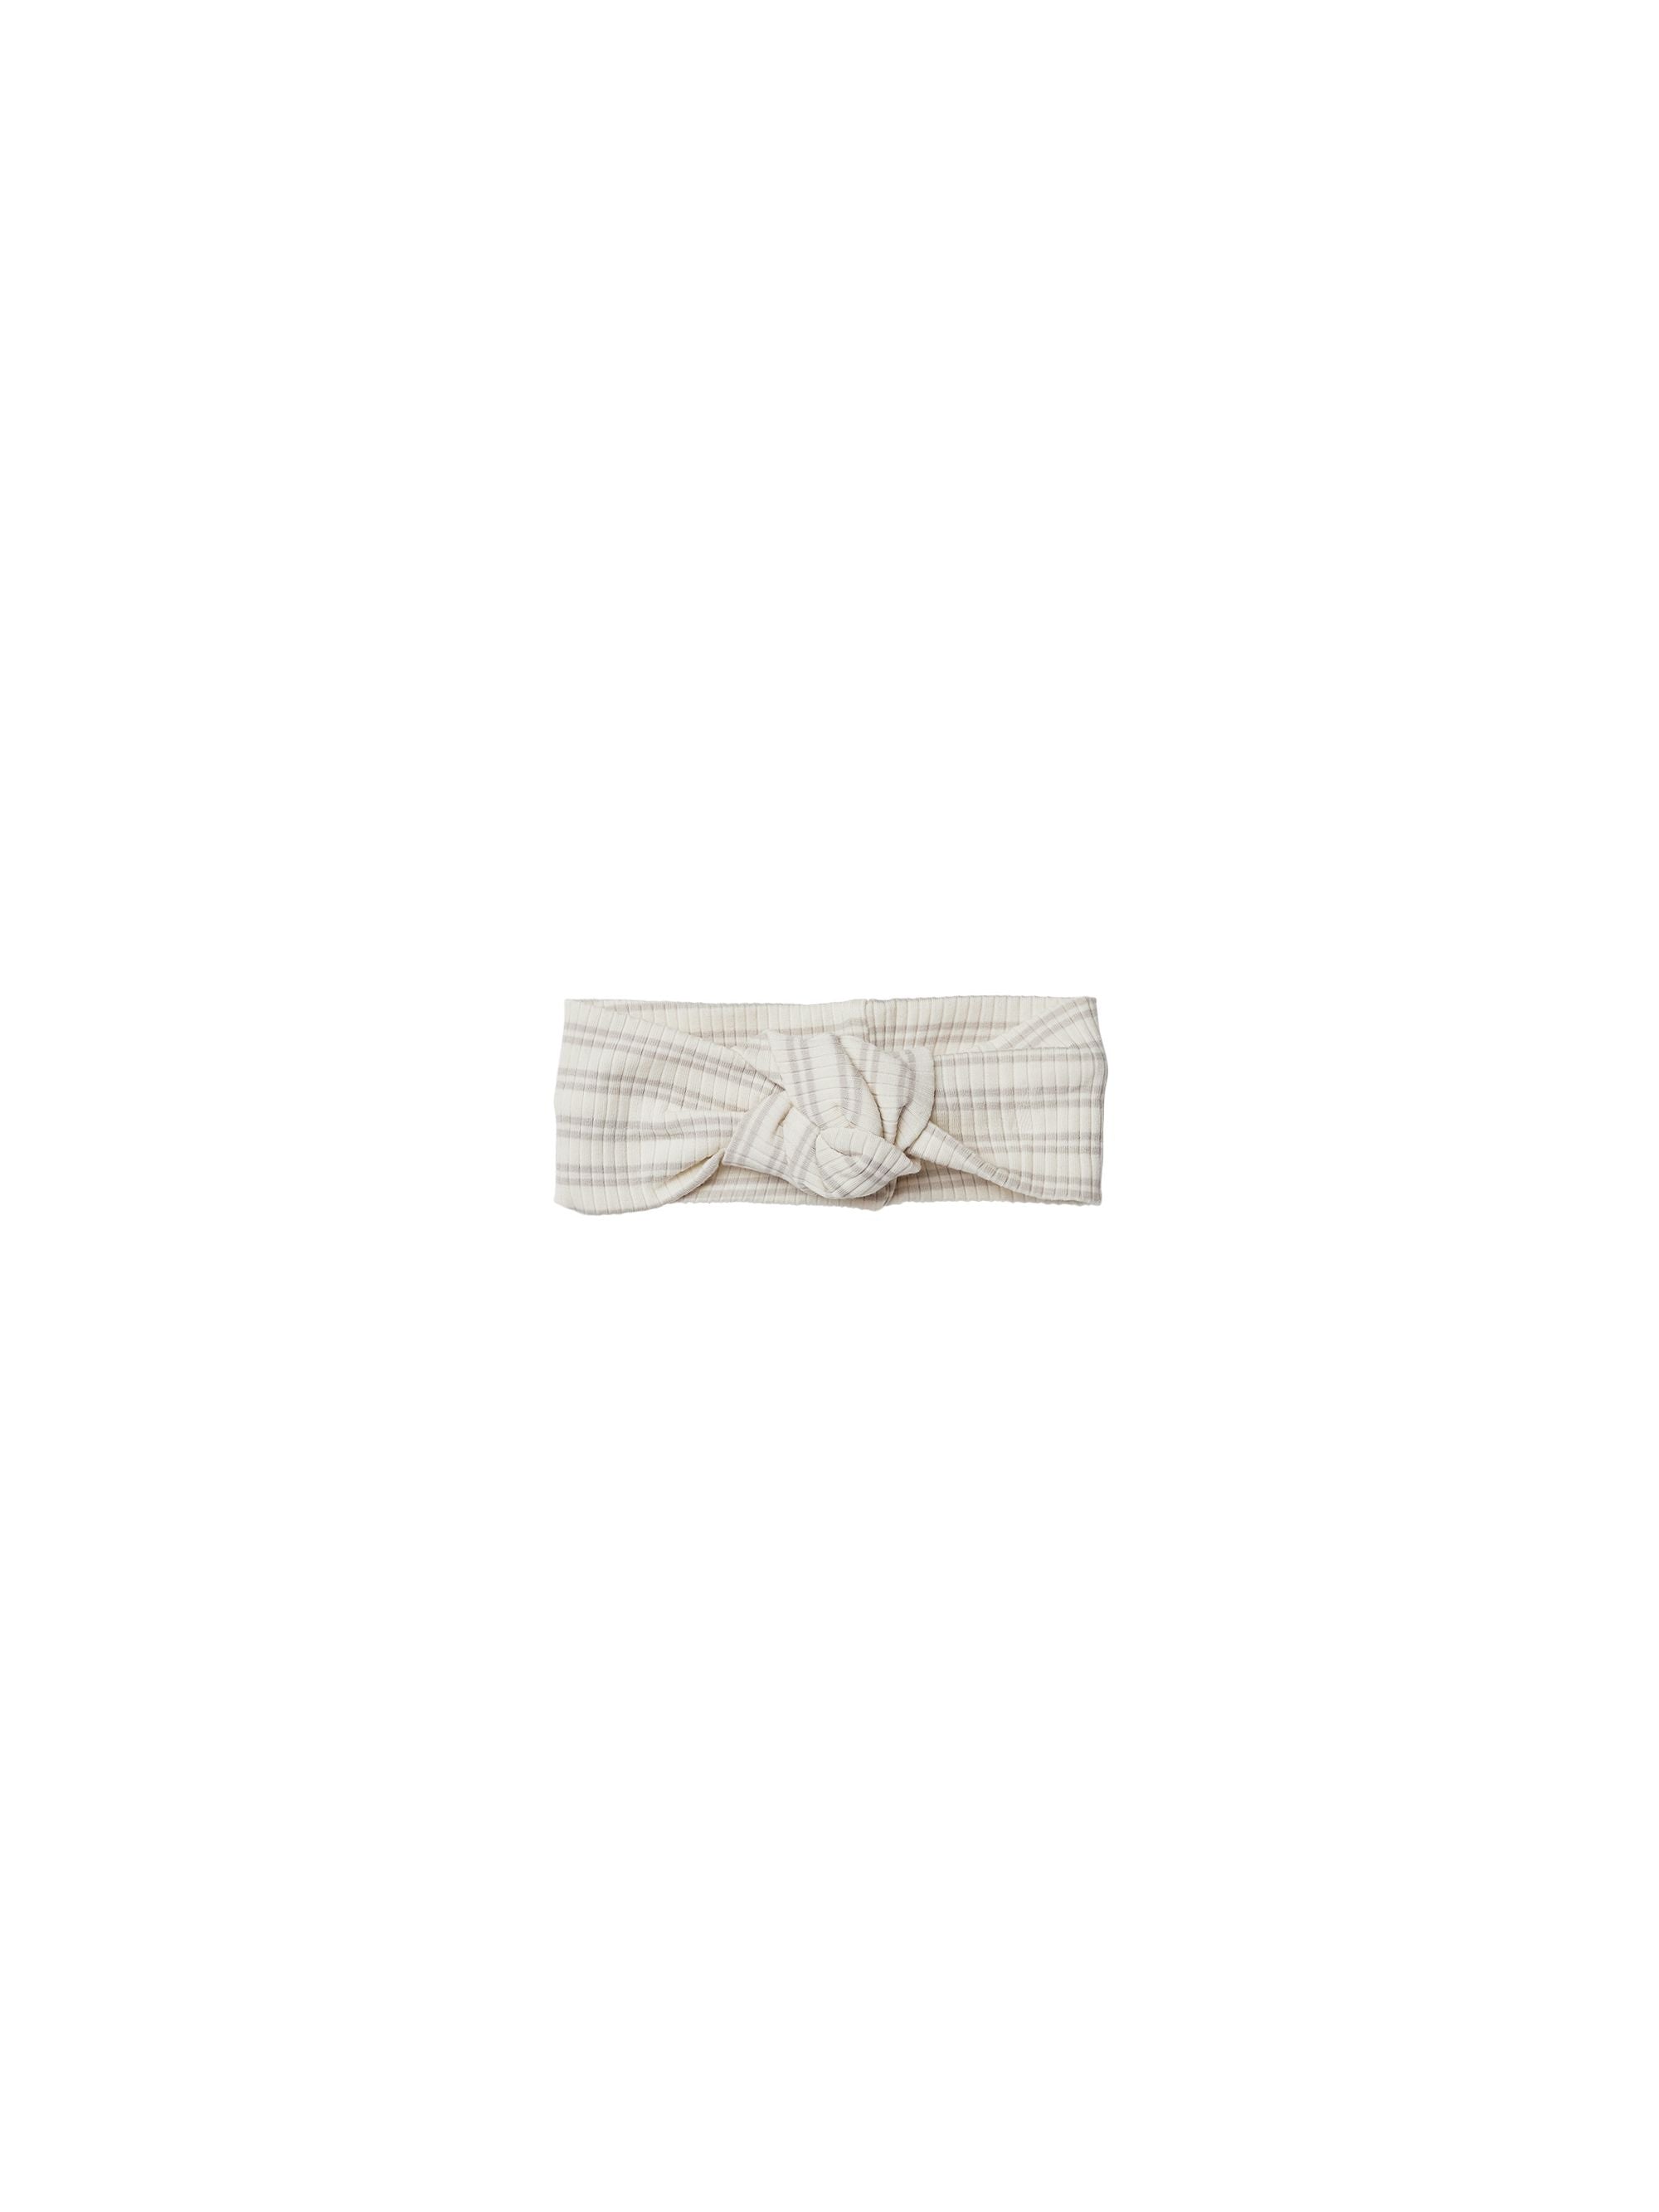 Quincy Mae Knotted Headband | Silver Stripe